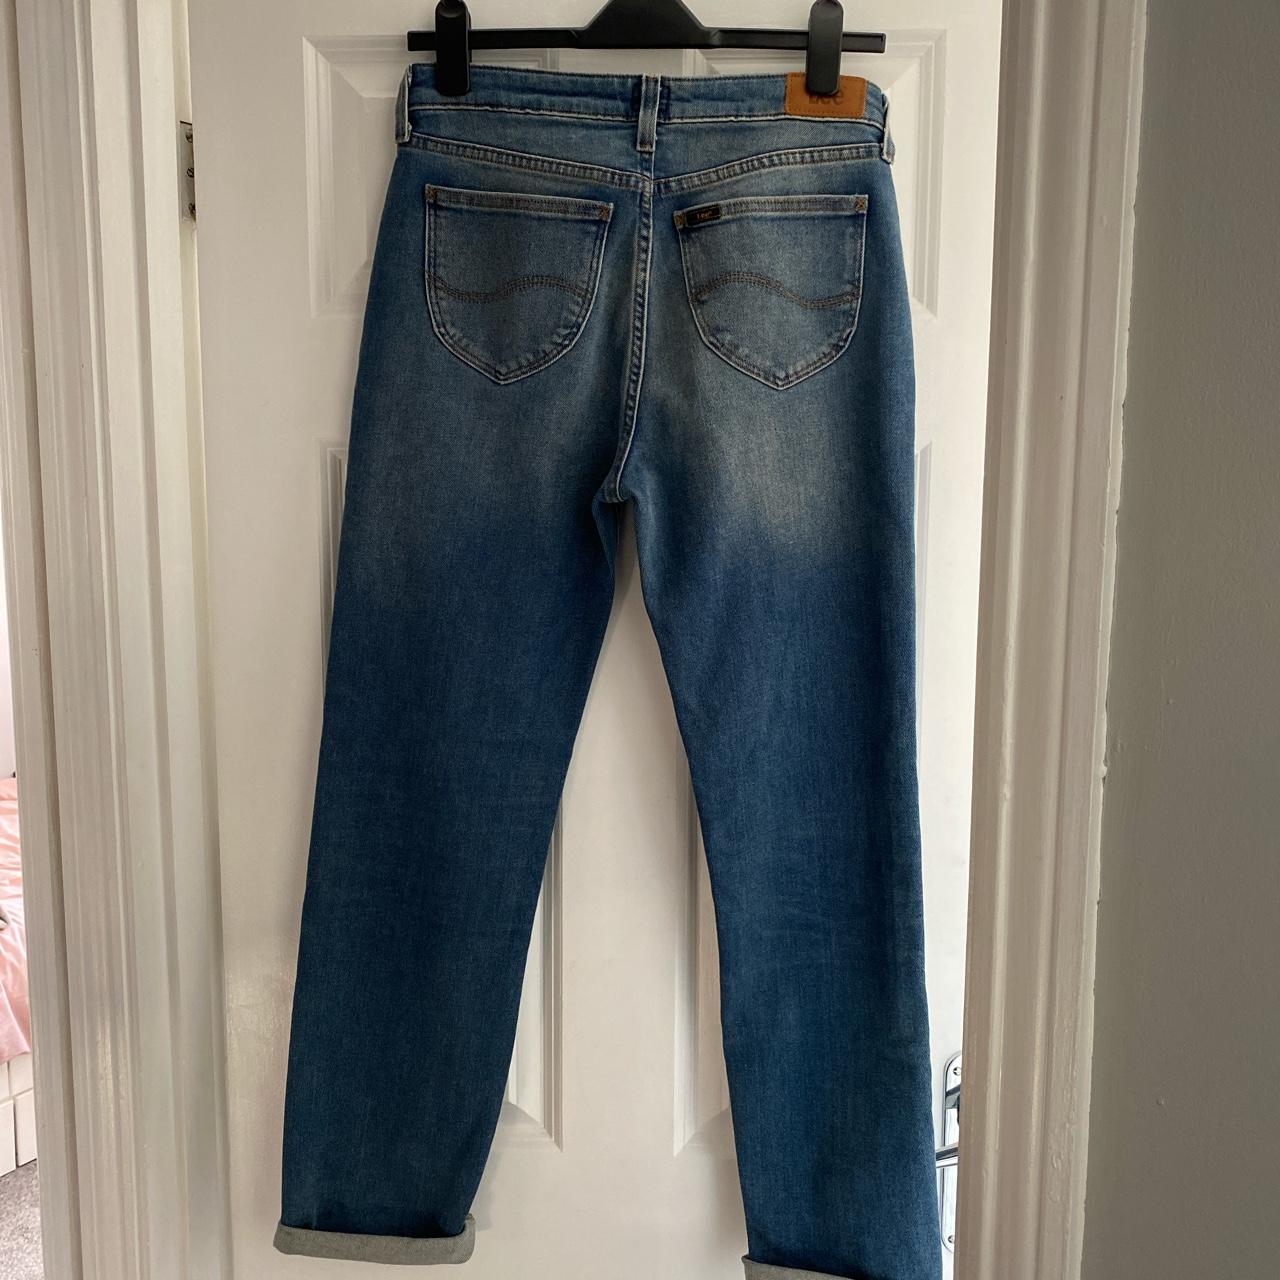 Lee mom denim jeans size 28W 30L never worn and in... - Depop